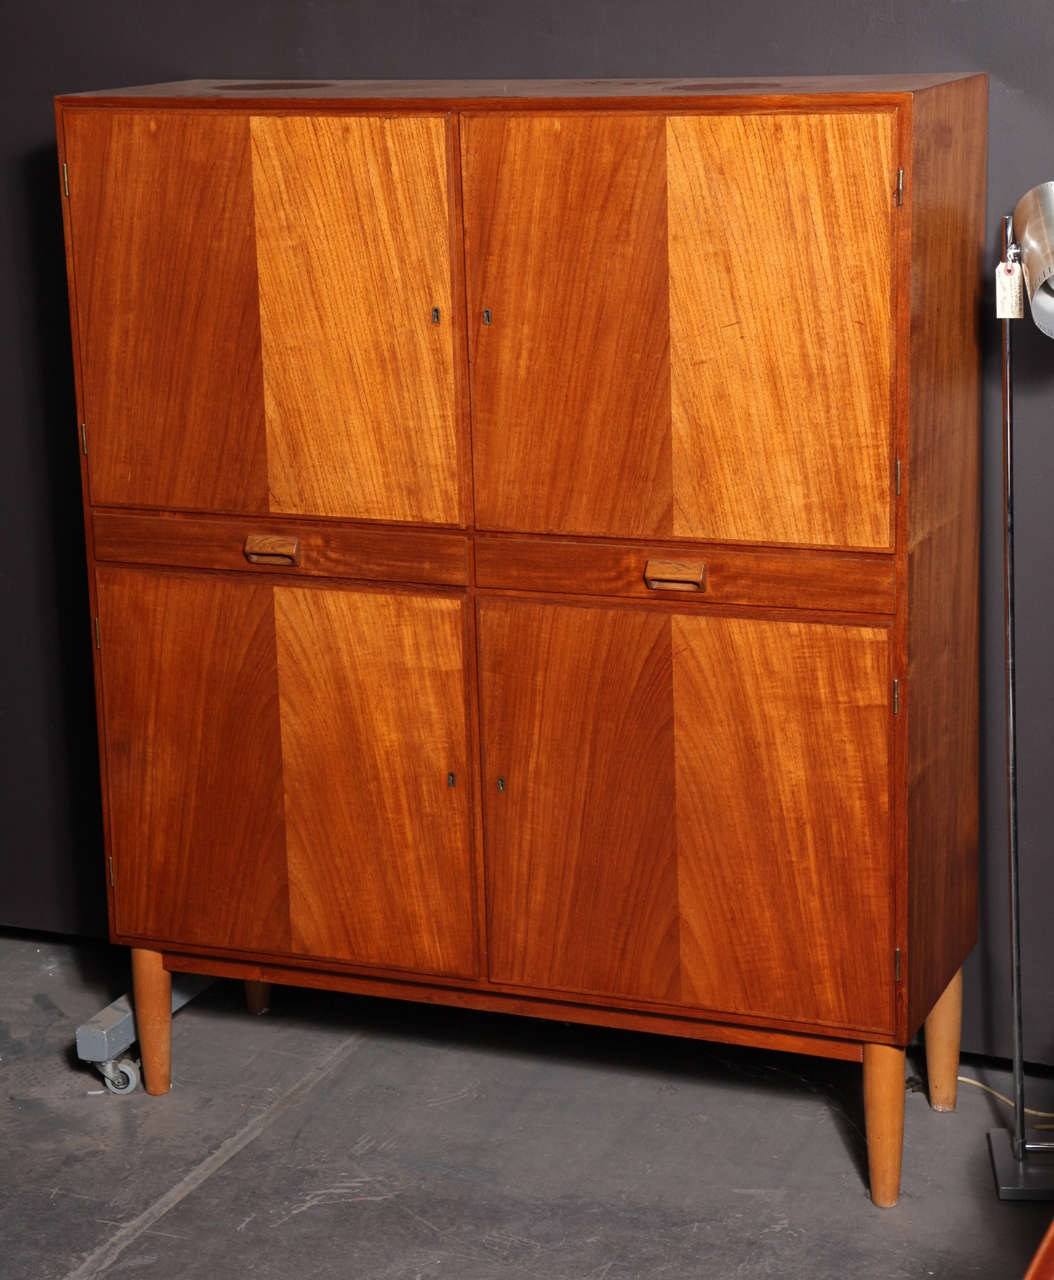 Vintage 1950s Danish Cabinet by Borge Mogensen

This Vintage Cabinet can be used for a million different things. Great in the bedroom as clothing storage, in the dining room as a buffet. The kitchen could need a pantry, or with it's shallow depth